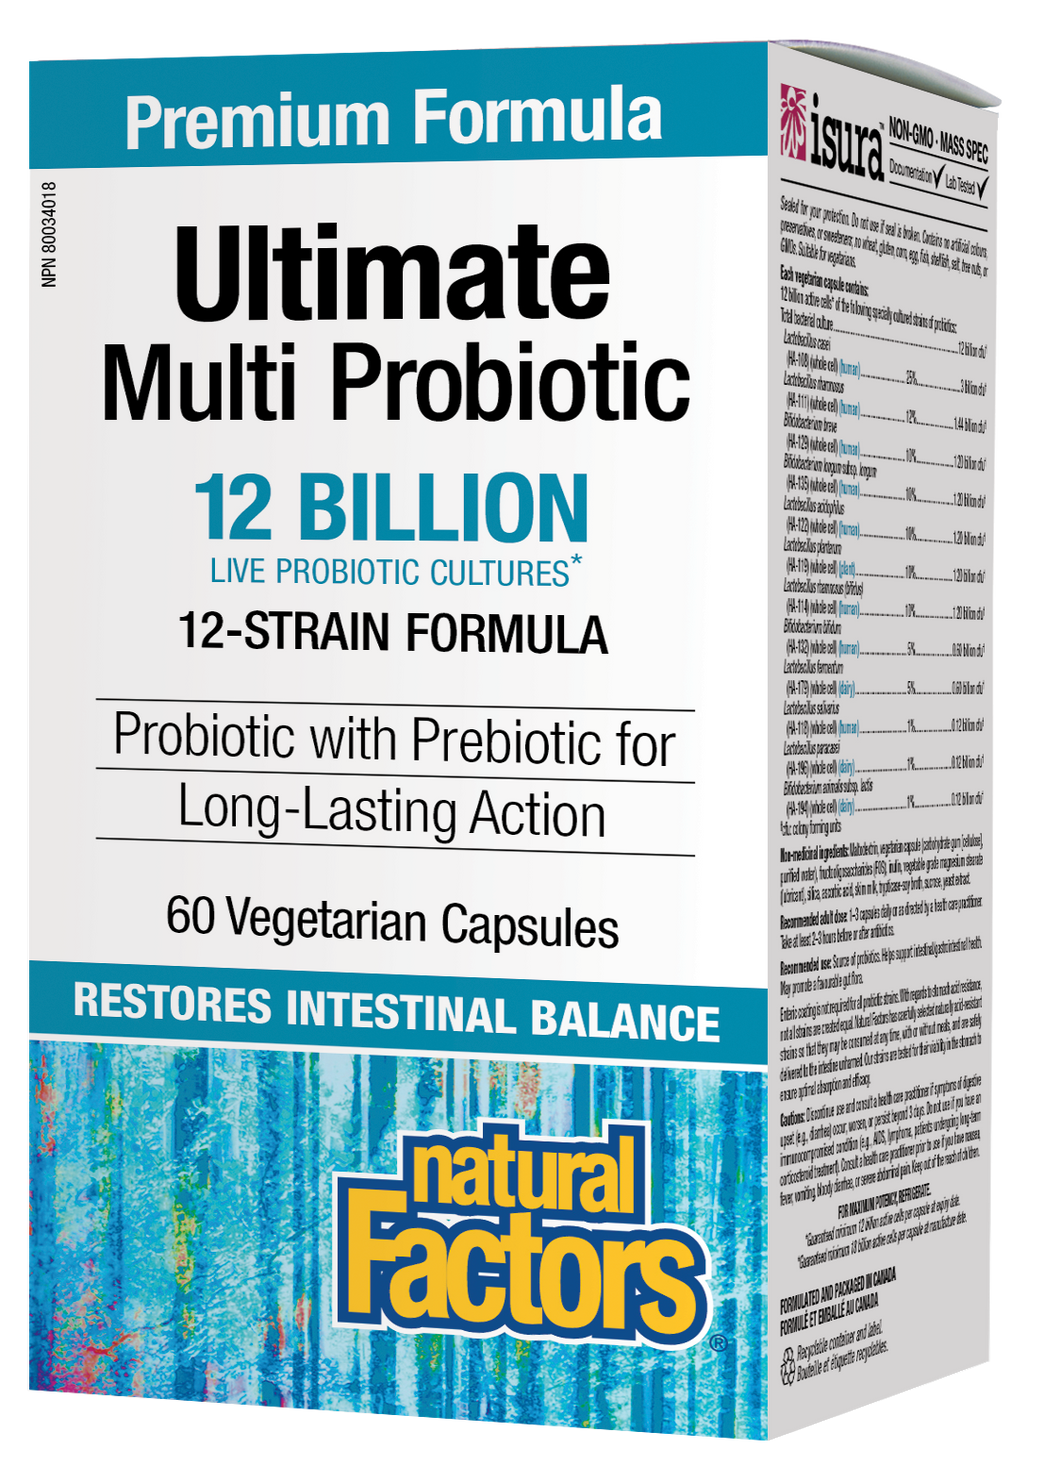 Probiotic supplementation provides live microorganisms that temporarily modify gut flora, helping to maintain natural intestinal balance, improve digestion and immunity. Natural Factors Ultimate Multi Probiotic contains active cells of a blend of specially cultured strains of probiotics, chosen for their compatibility and ability to survive stomach acidity.